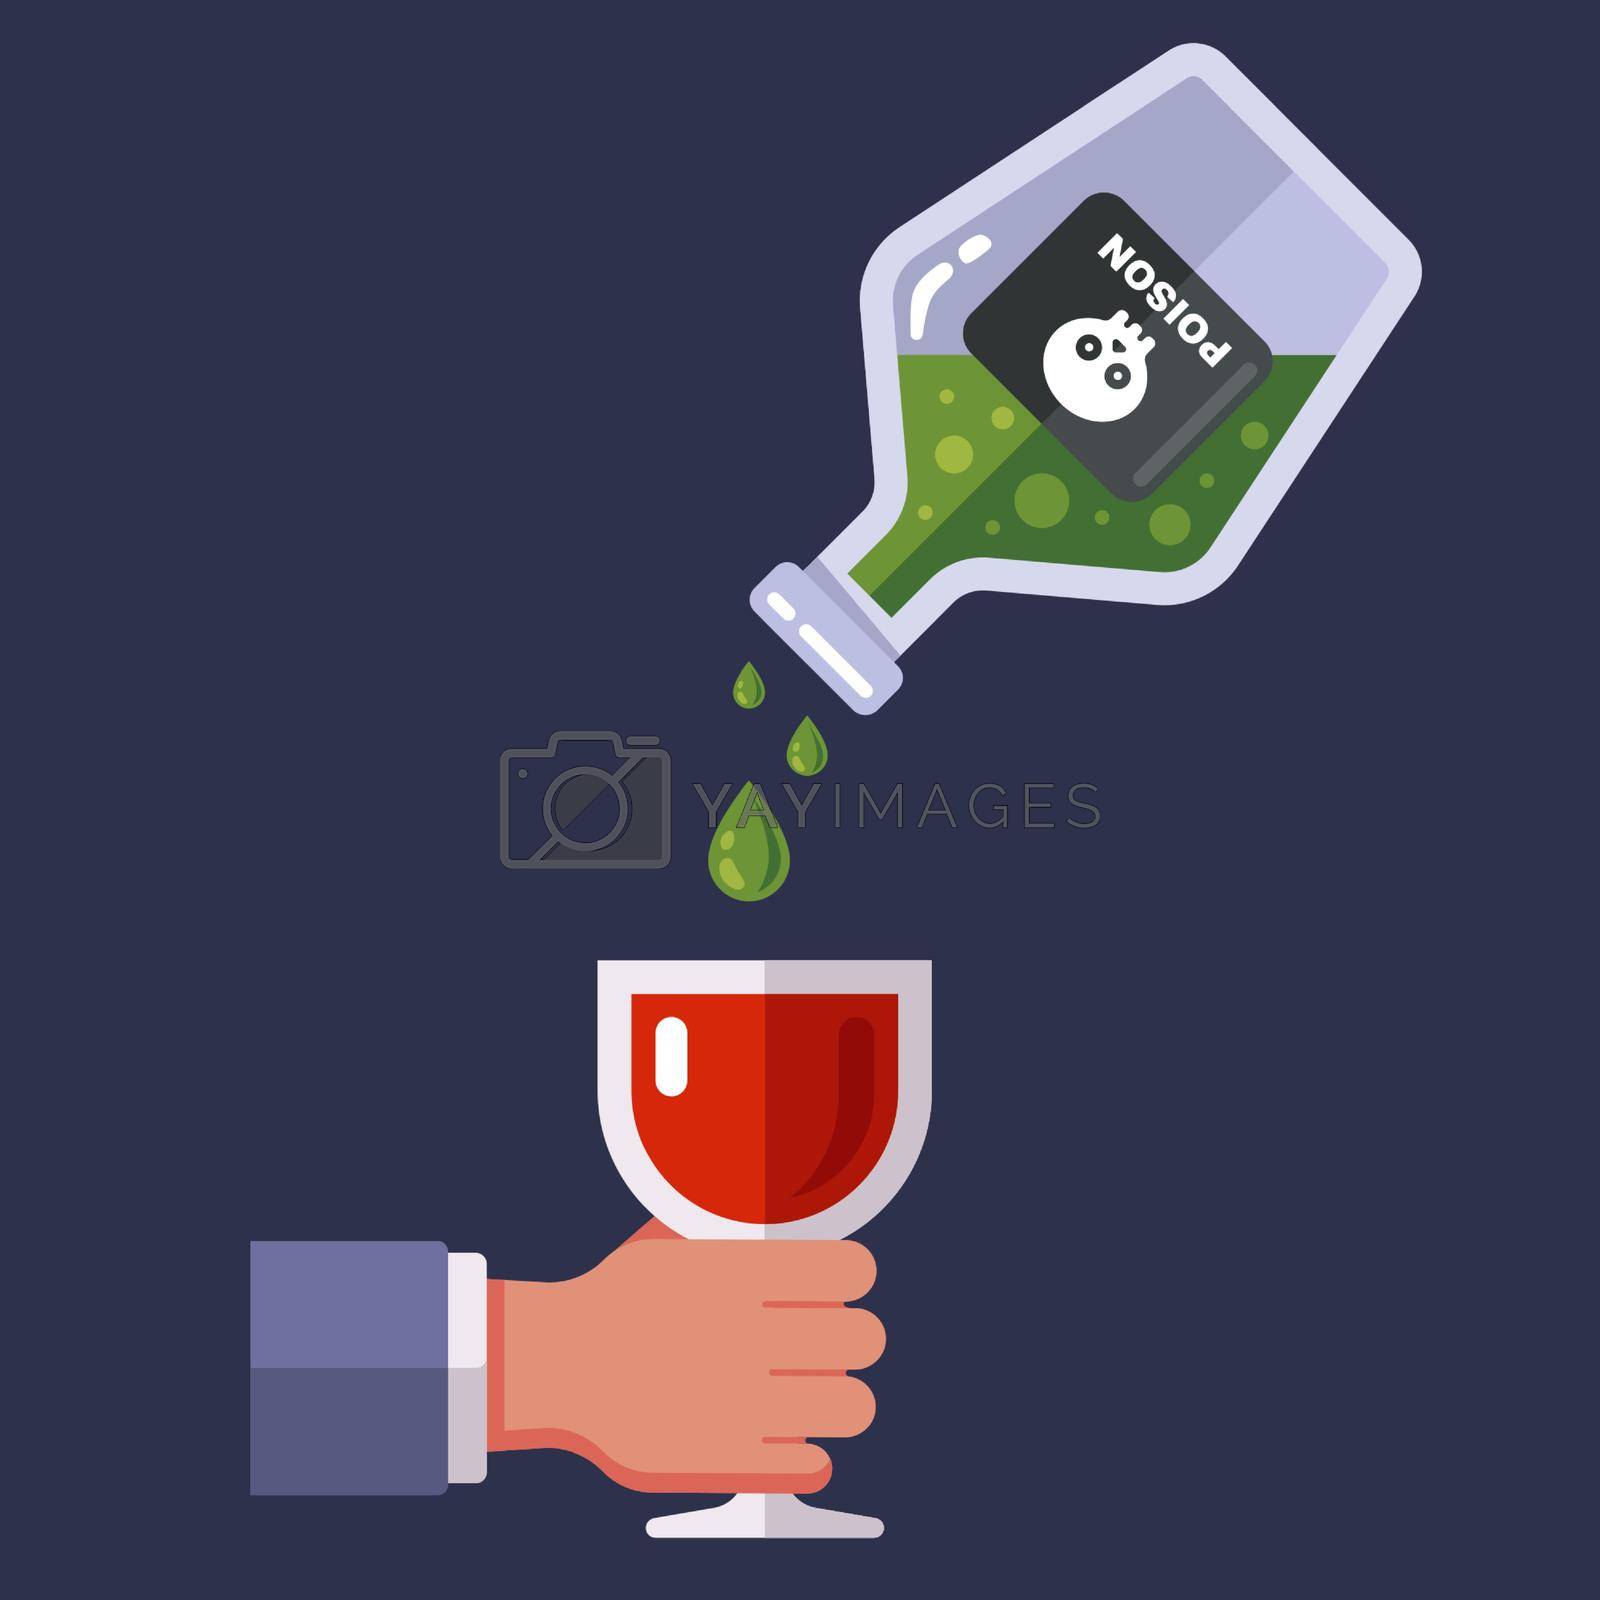 Royalty free image of pour poison into a glass of wine. secret murder of a person by poisoning. by PlutusART